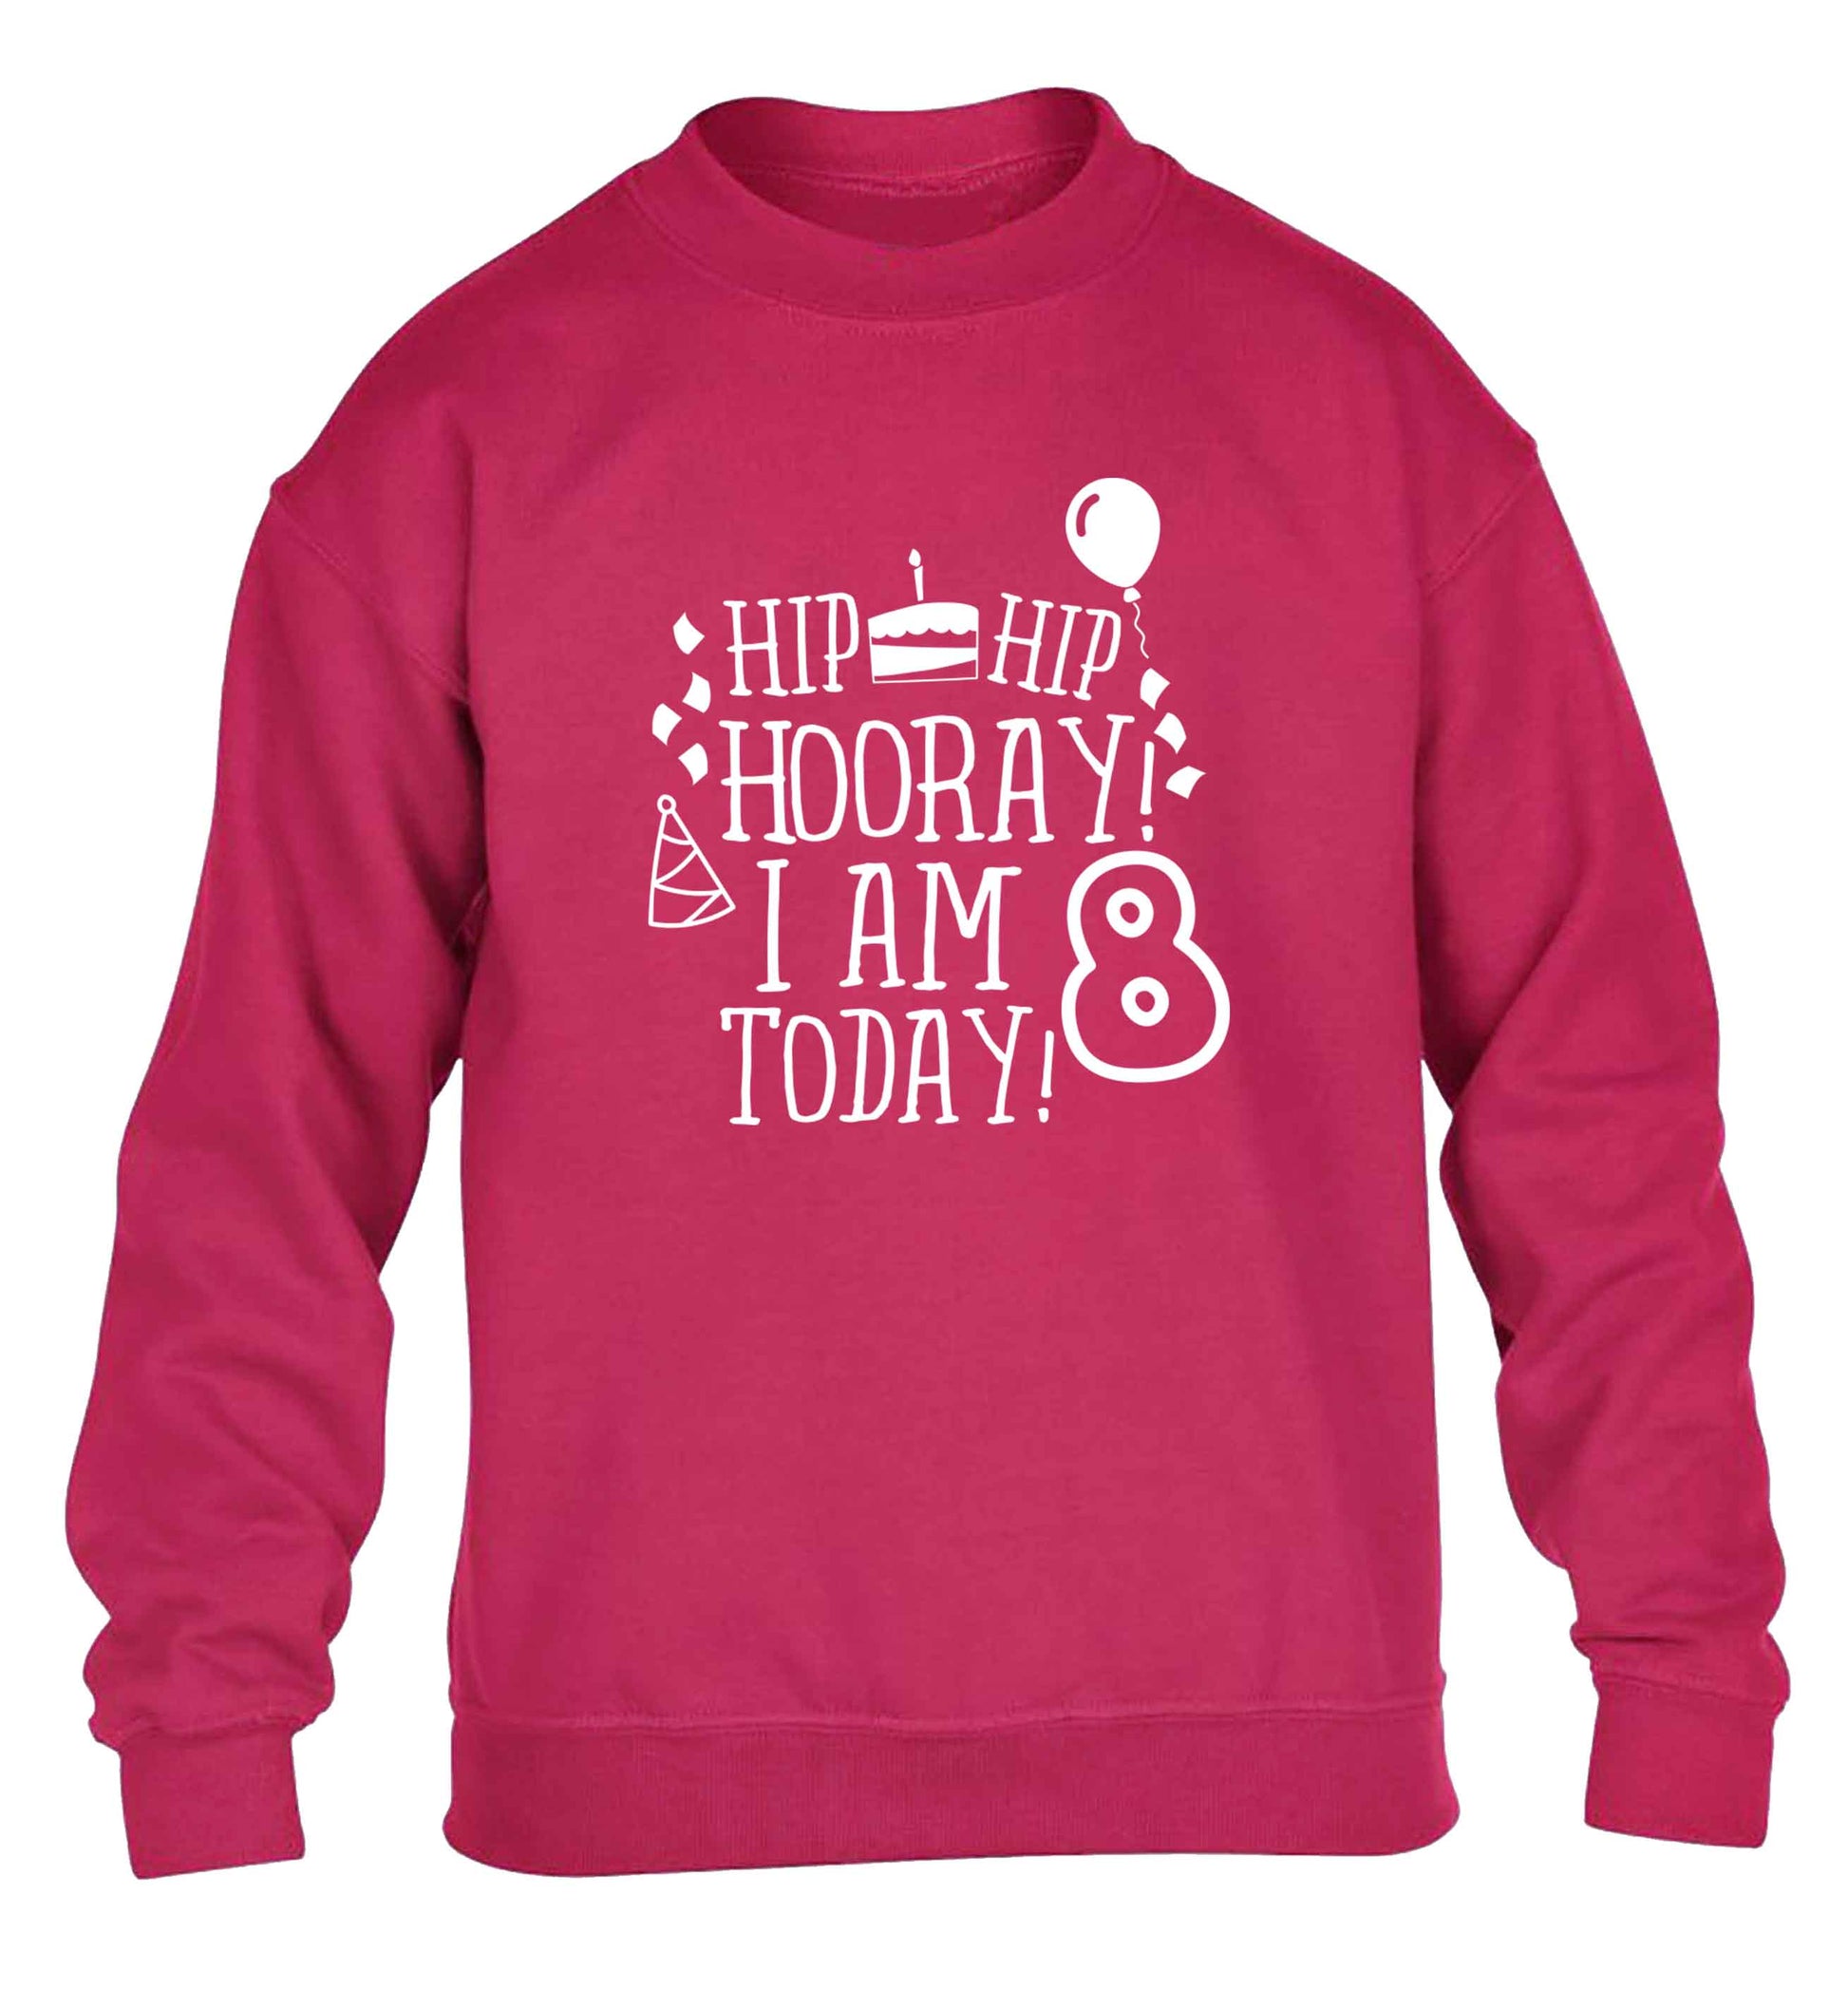 Hip hip hooray I am 8 today! children's pink sweater 12-13 Years